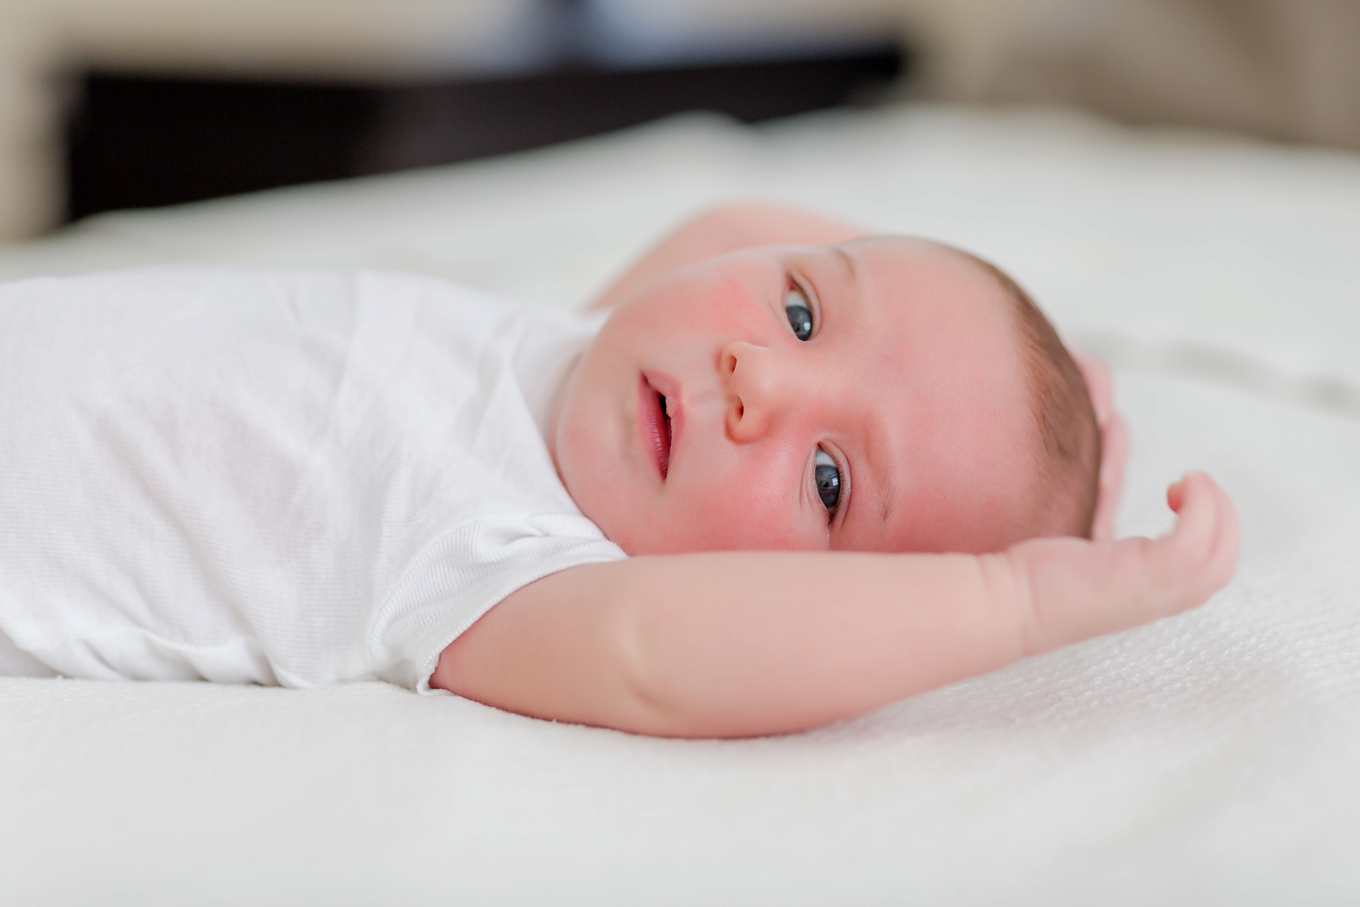 Comfortable in home Lifestyle newborn photography by brooke tucker photography